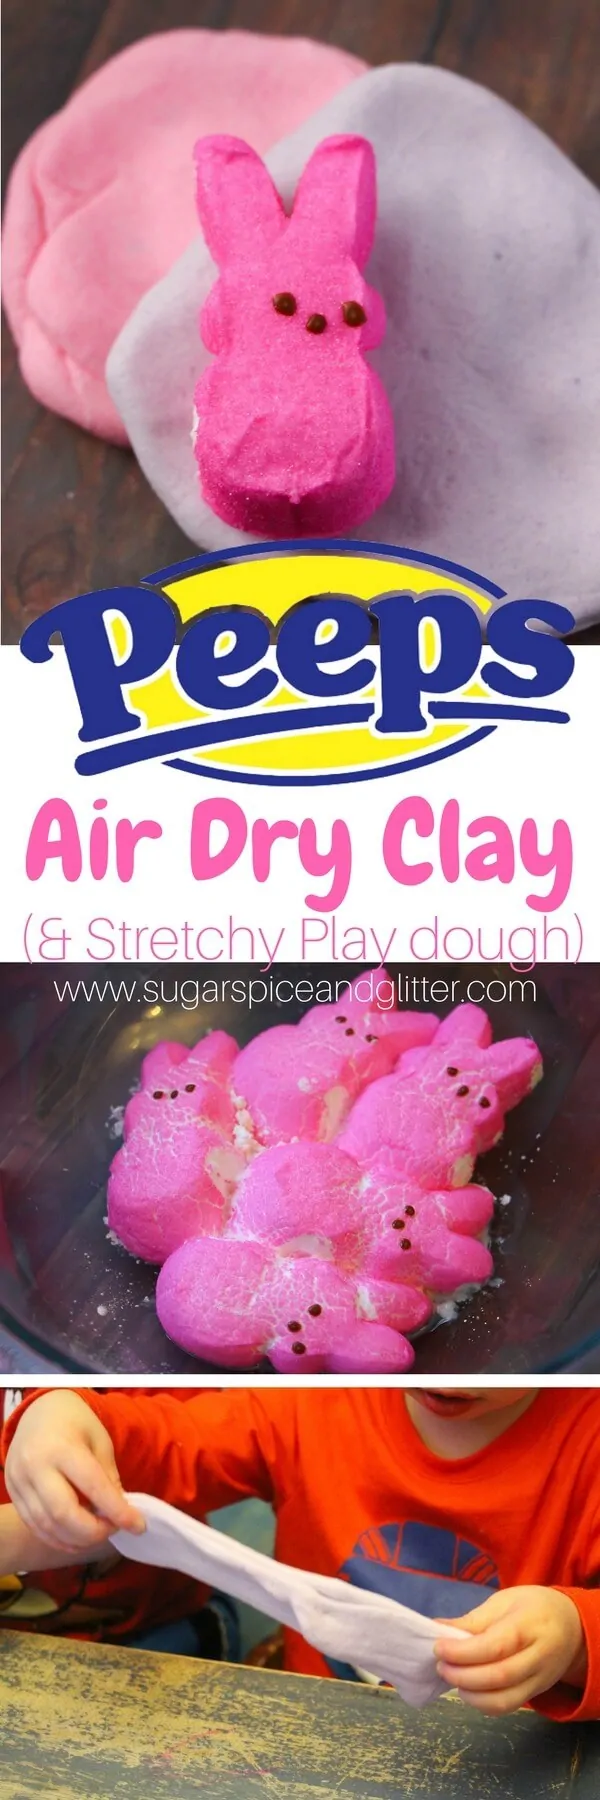 A delicious and easy recipe for Peeps Air Dry Clay - an edible marshmallow play dough that dries to make beautiful porcelain-style ornaments.